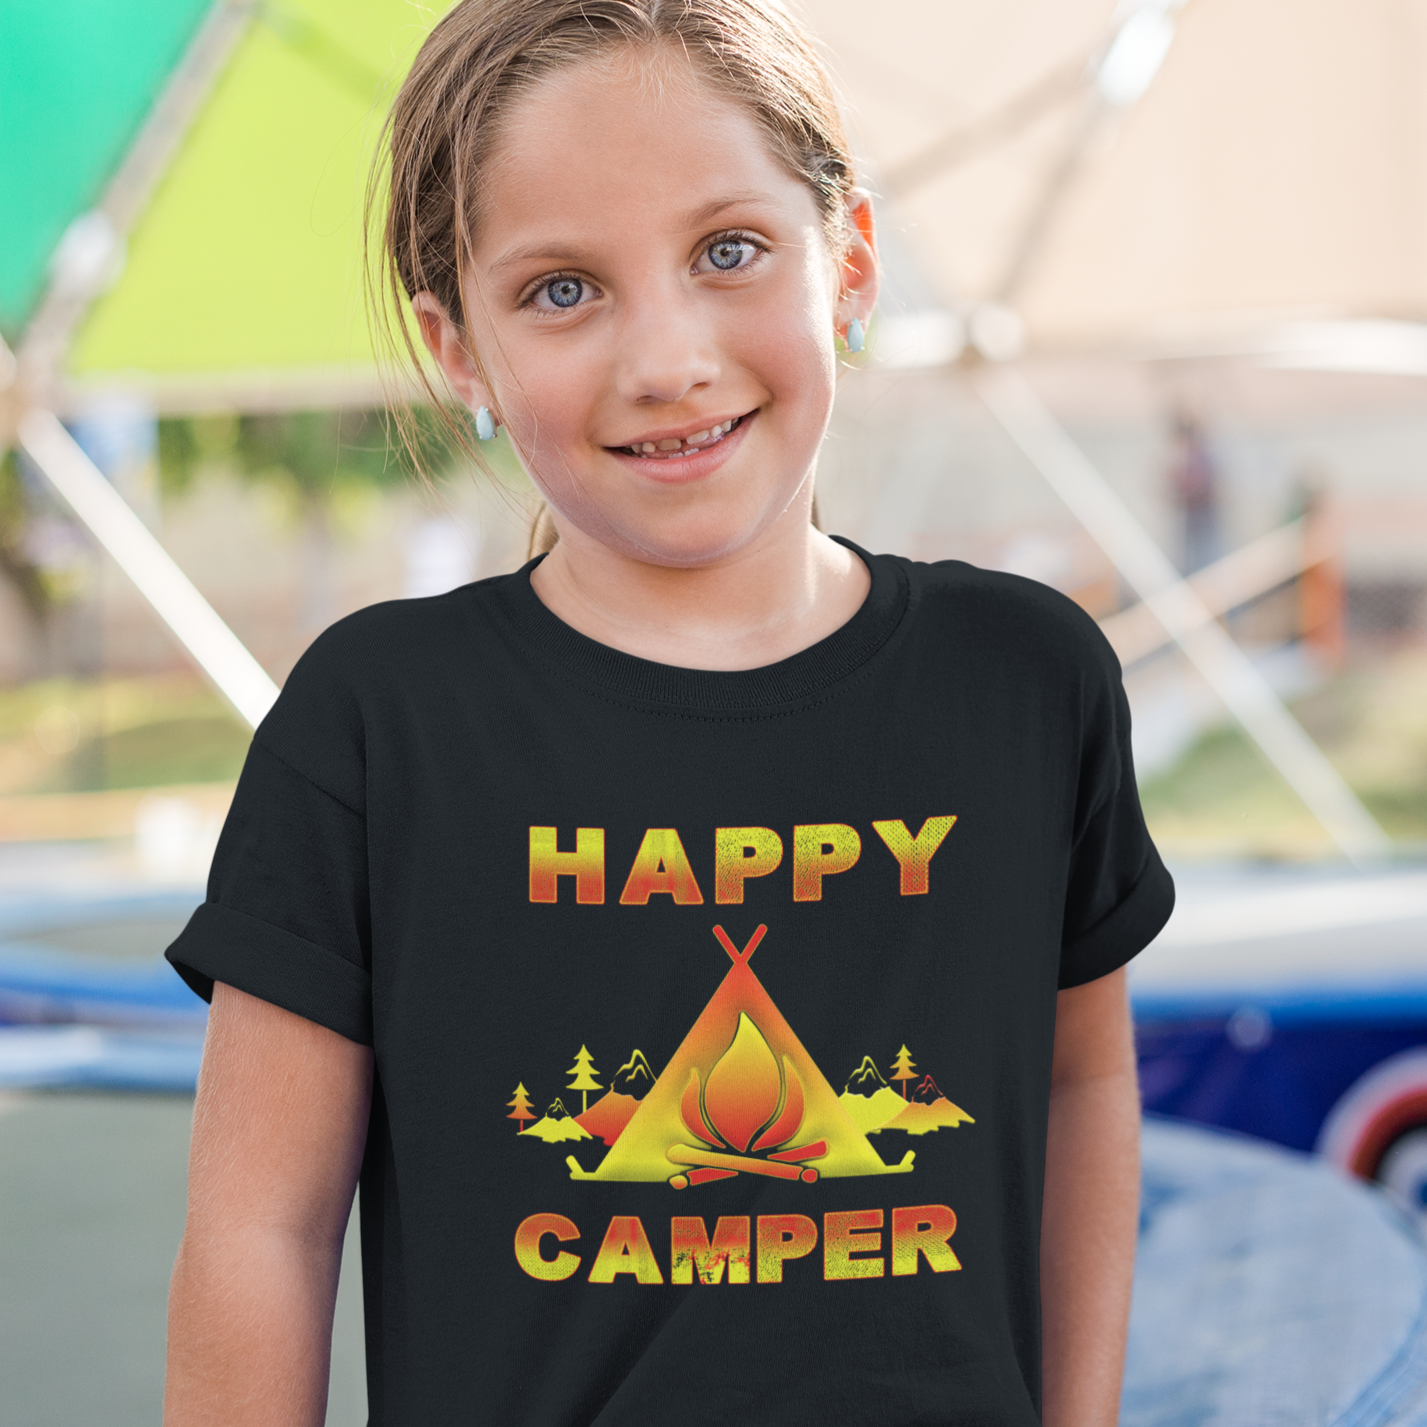 Camping Shirt for Girls - Camping Clothes for Girls - Happy Camper Camping Shirts for Kids Funny - image 2 of 9